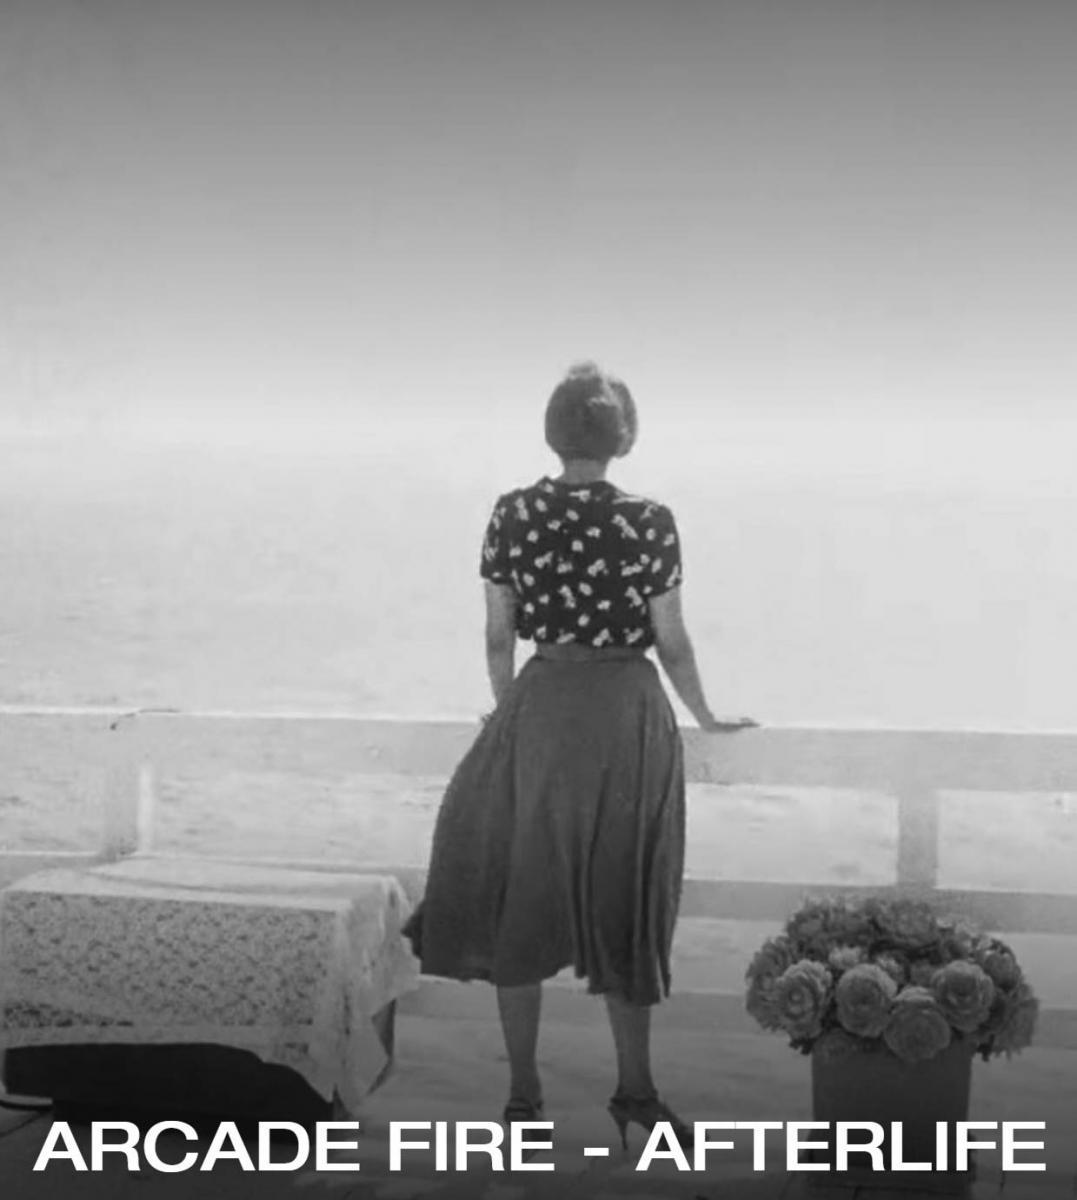 ARCADE FIRE - AFTERLIFE, The Strength of Architecture